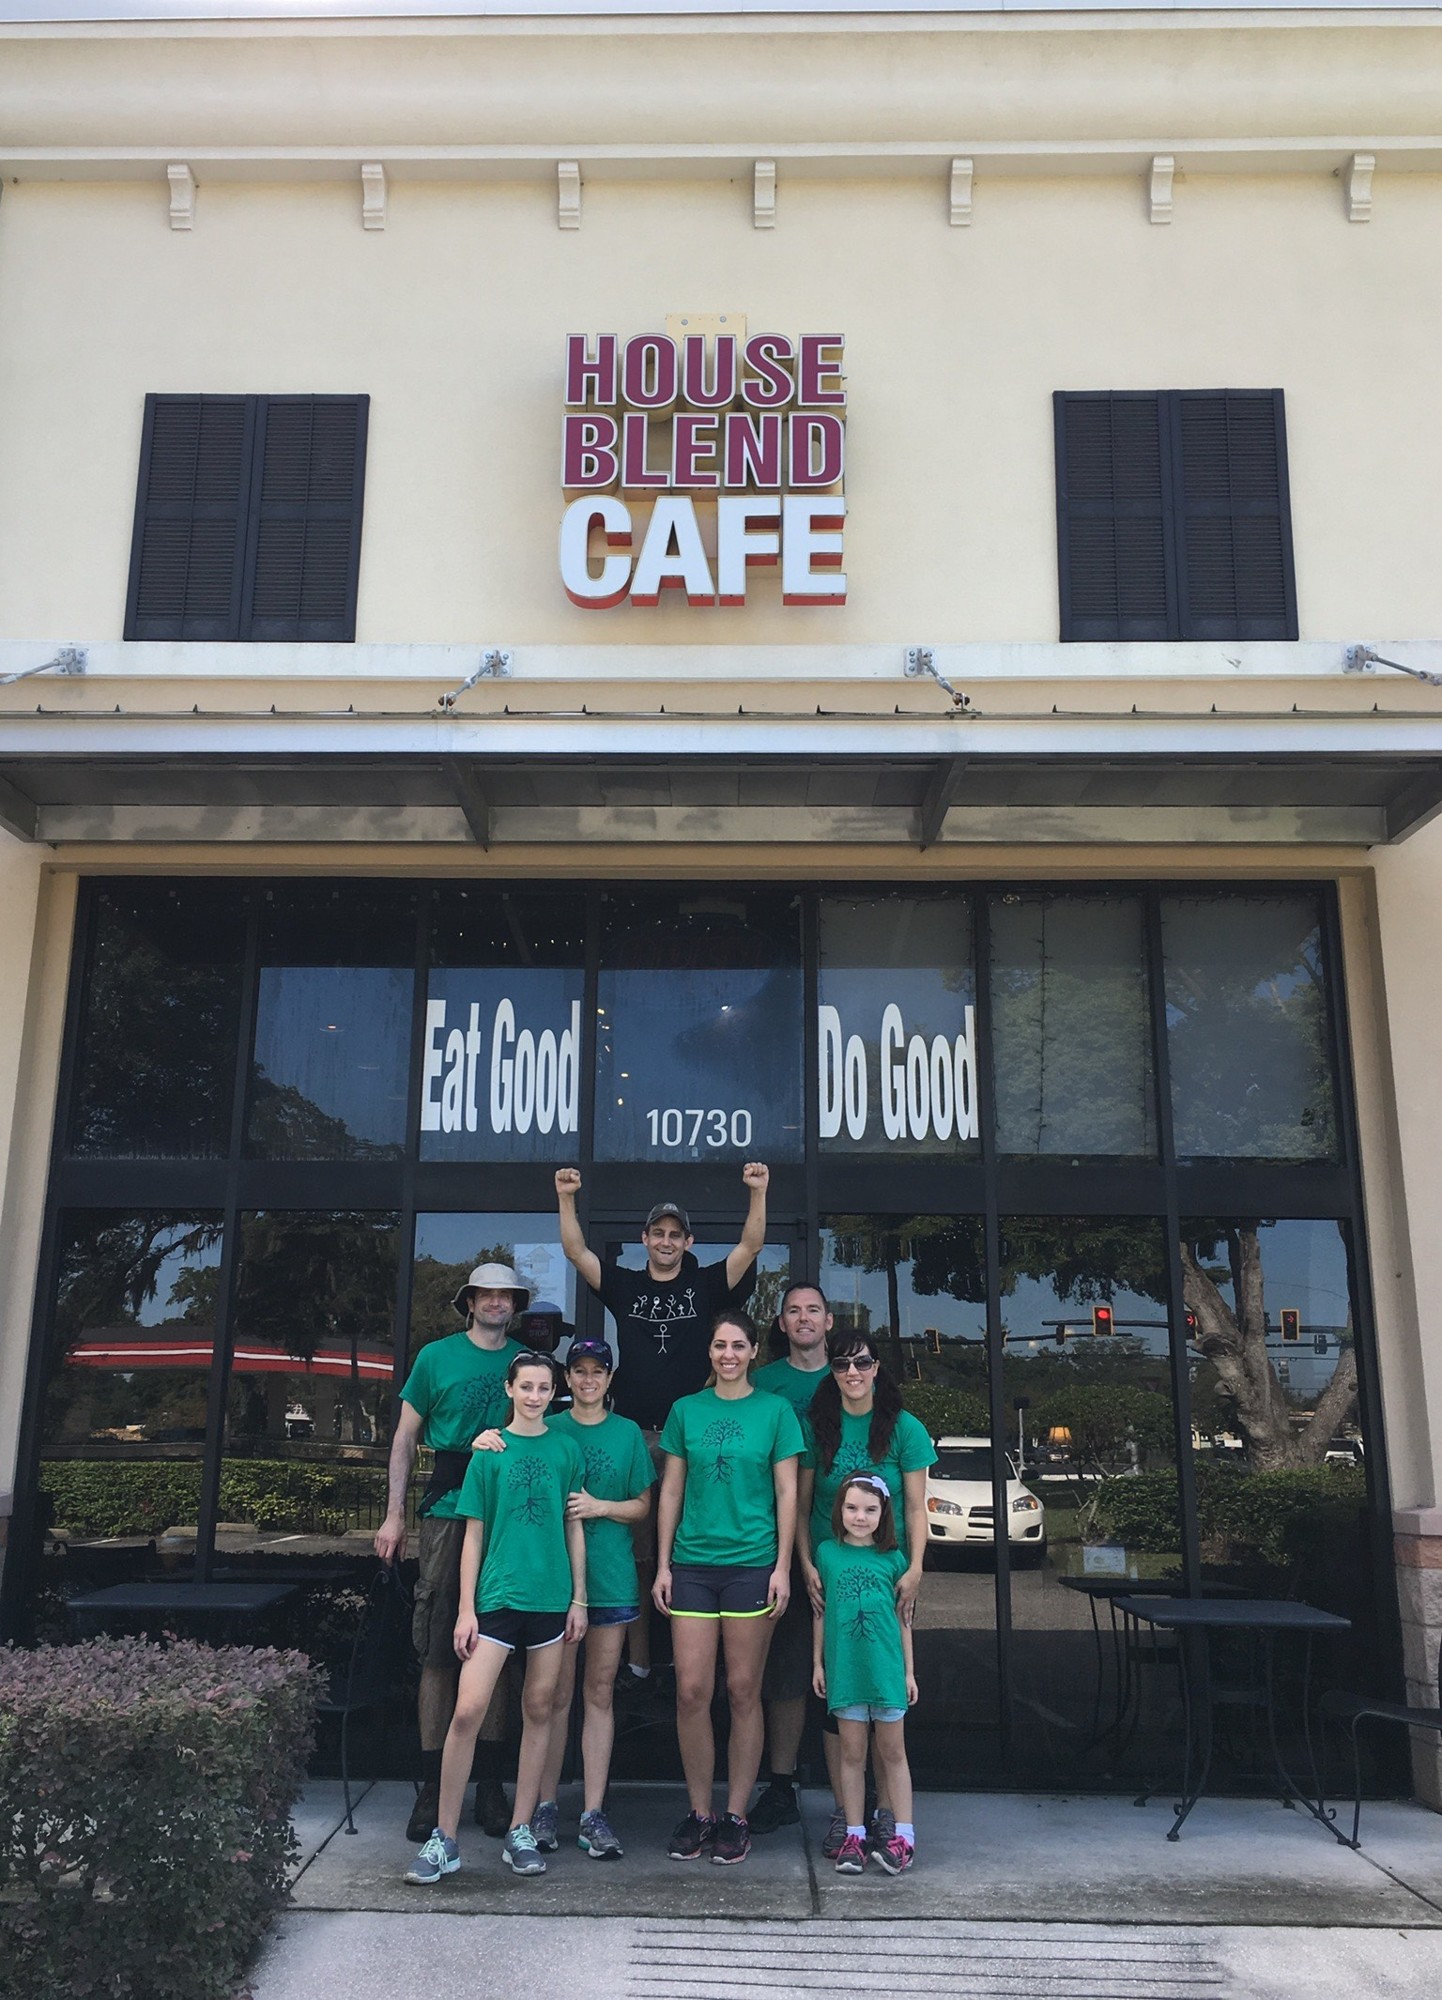 Volunteers from Mosaic Church love House Blend Café. (Courtesy photo)